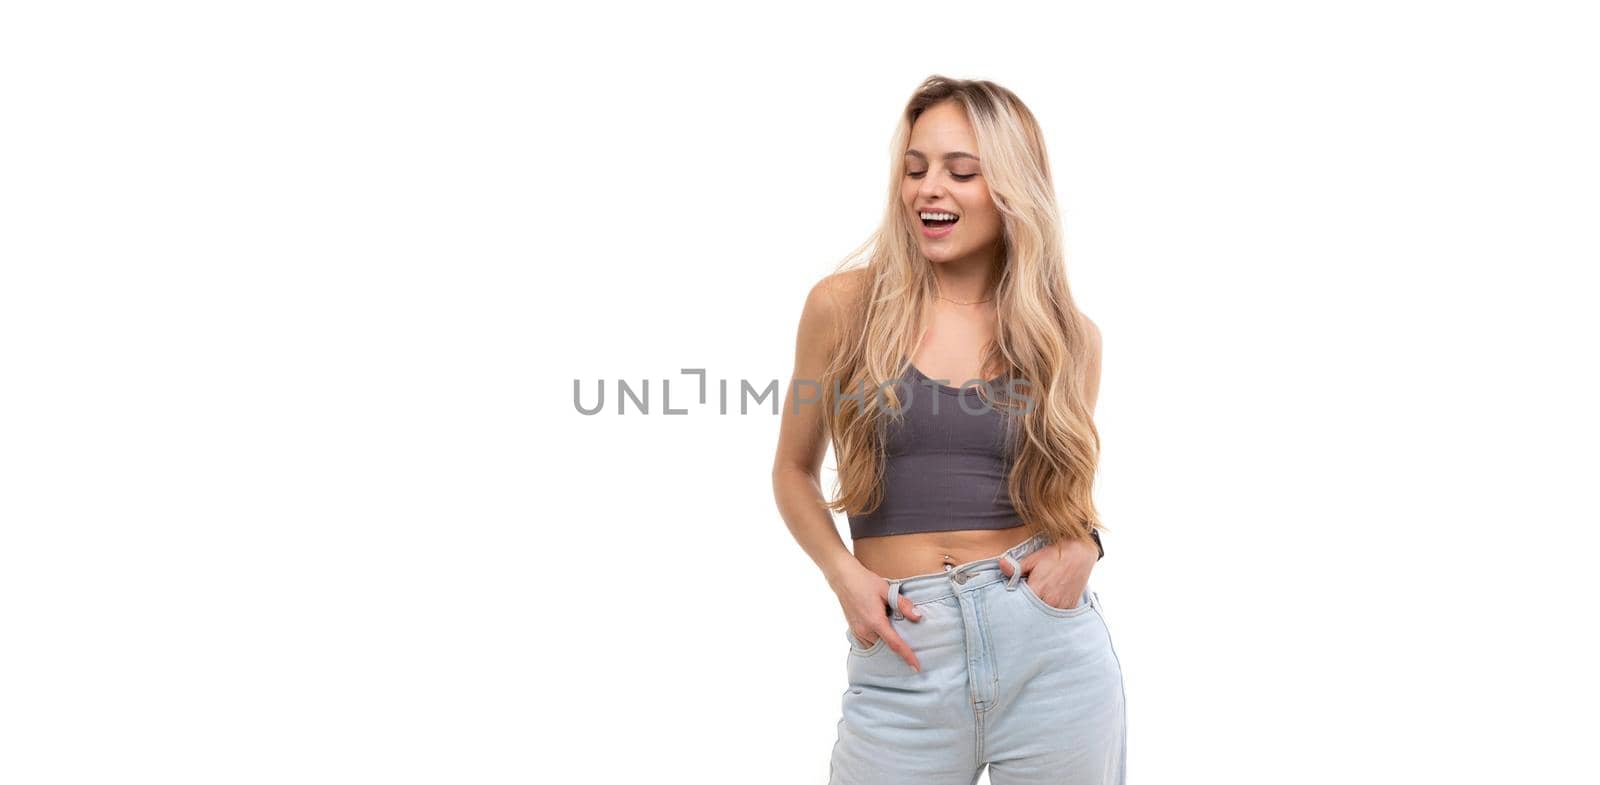 beautiful young woman in gray tank top laughing over isolated background.